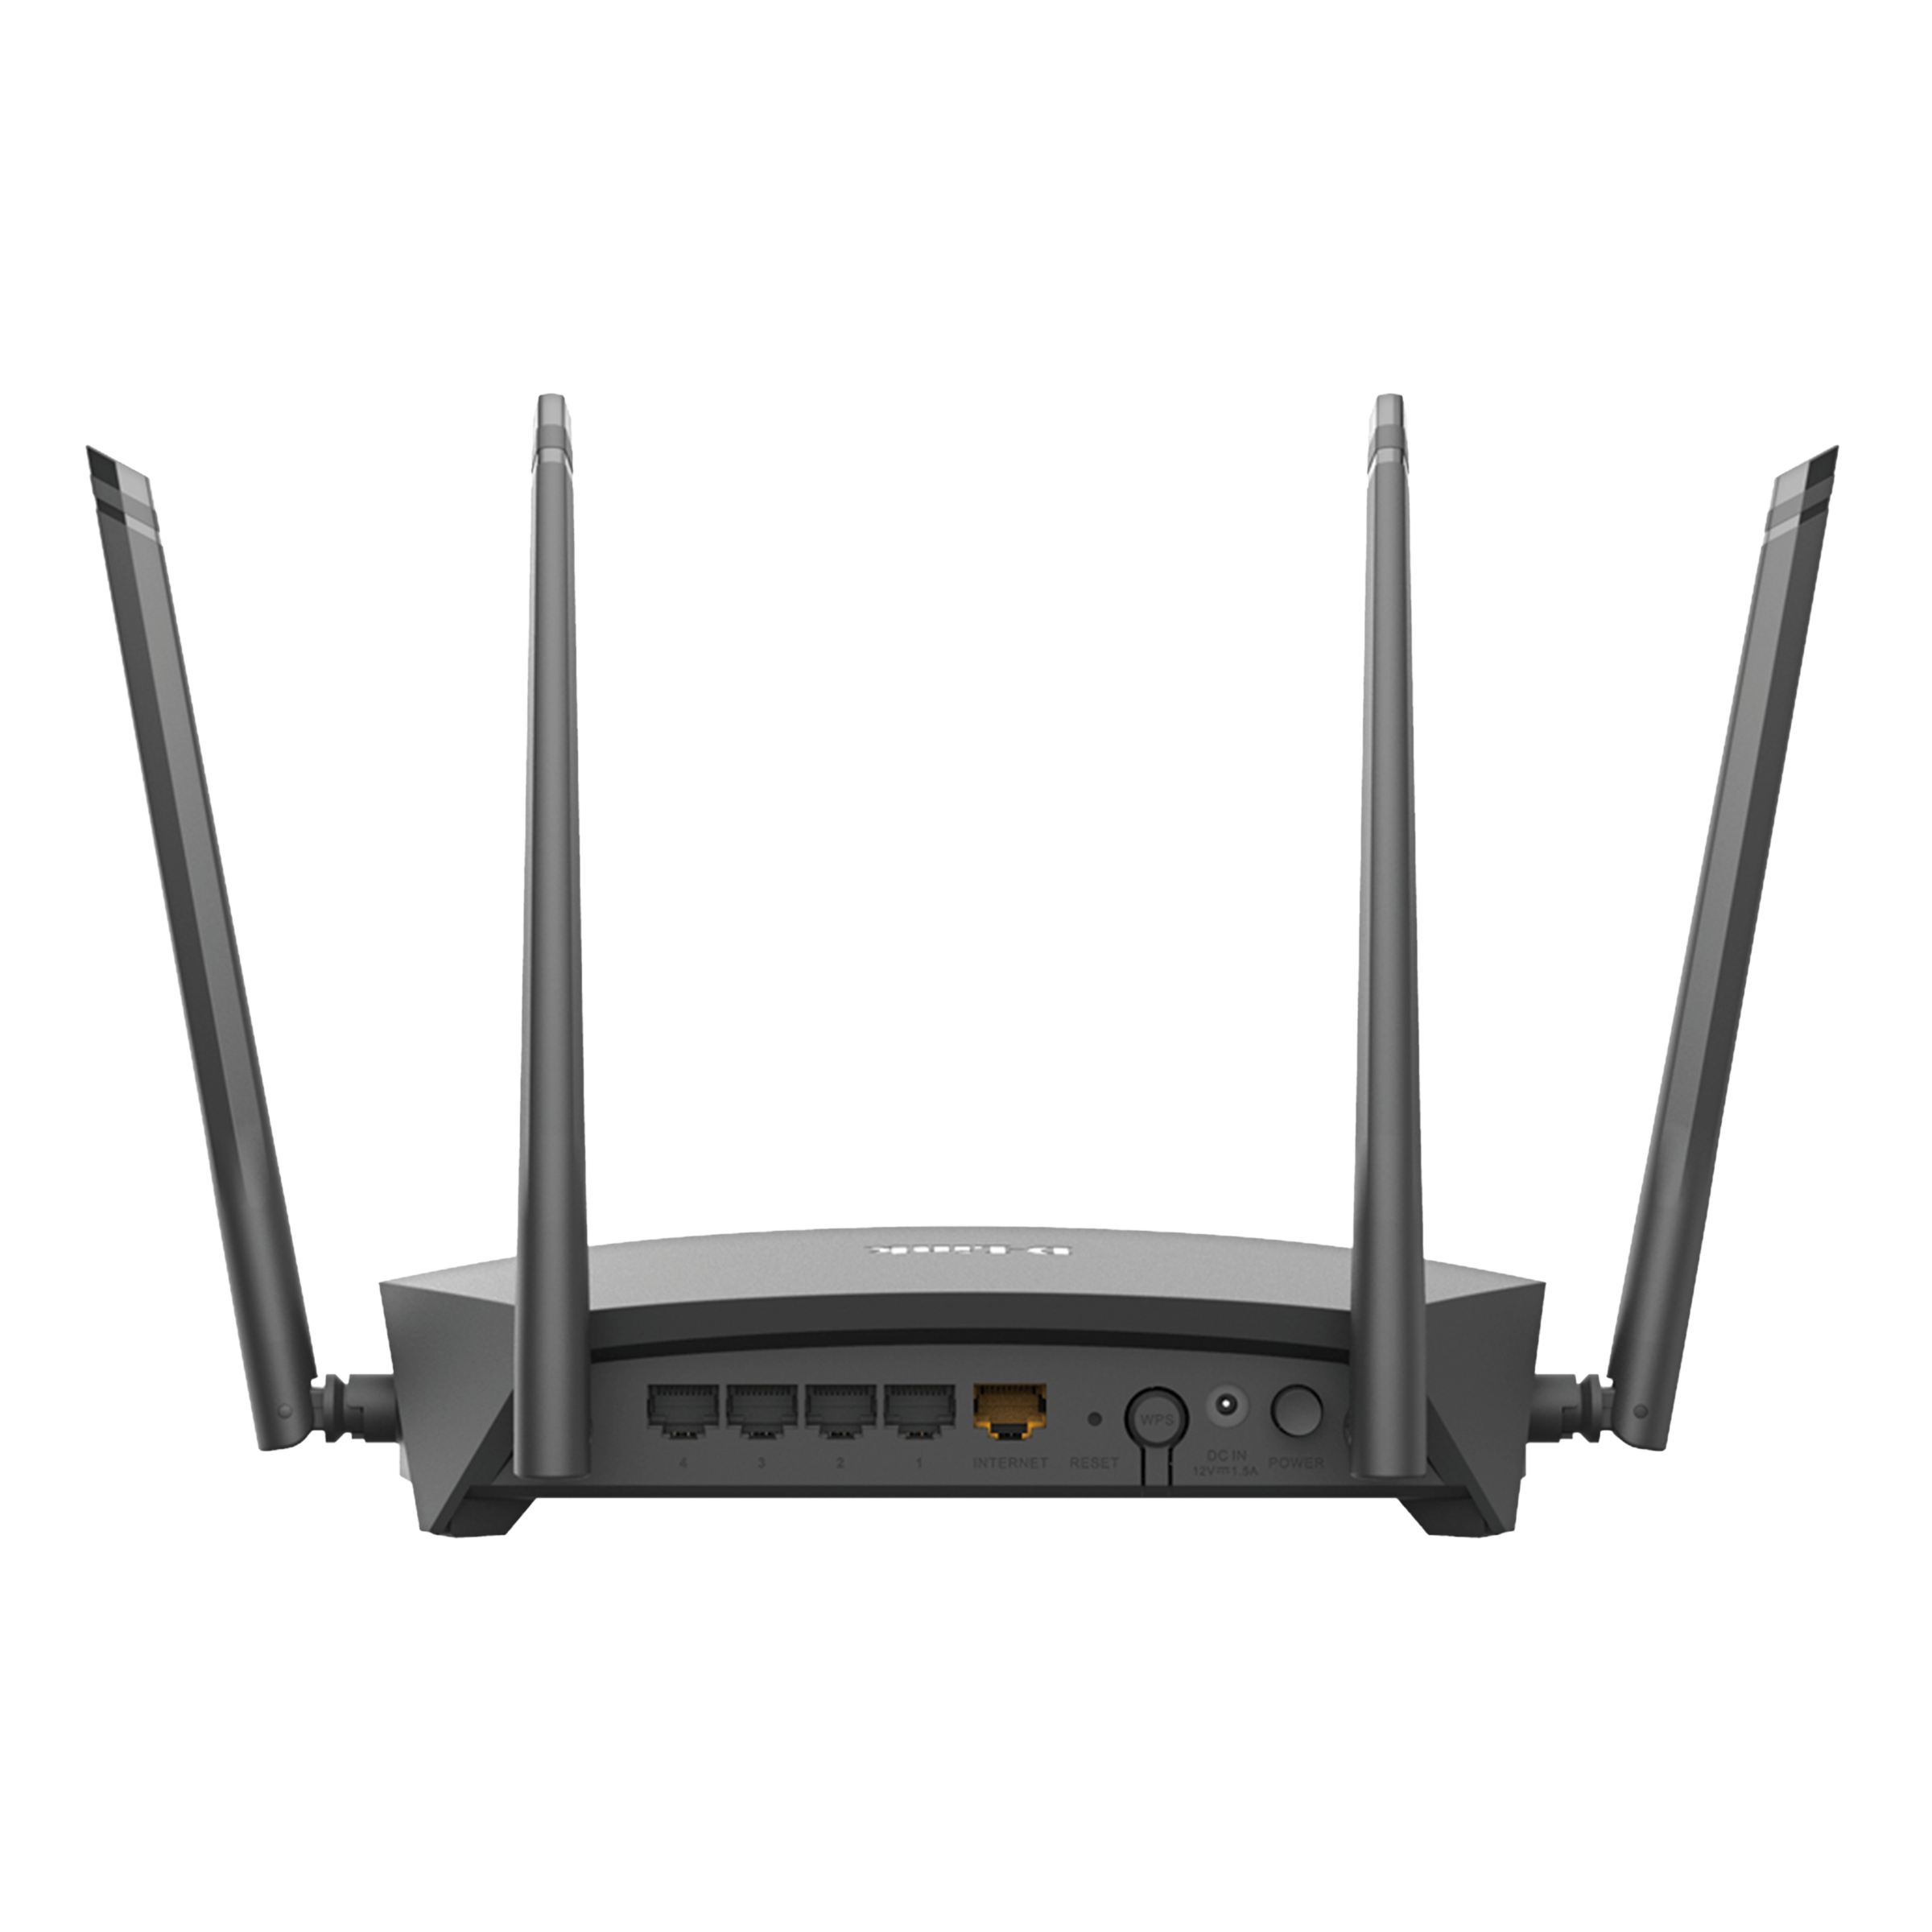 D-Link AC 1900 Dual Band 1300 Mbps WiFi EasyMesh Router (4 Antennas, 4 LAN Ports, MU-MIMO Supported, DIR-1950, Black)_2